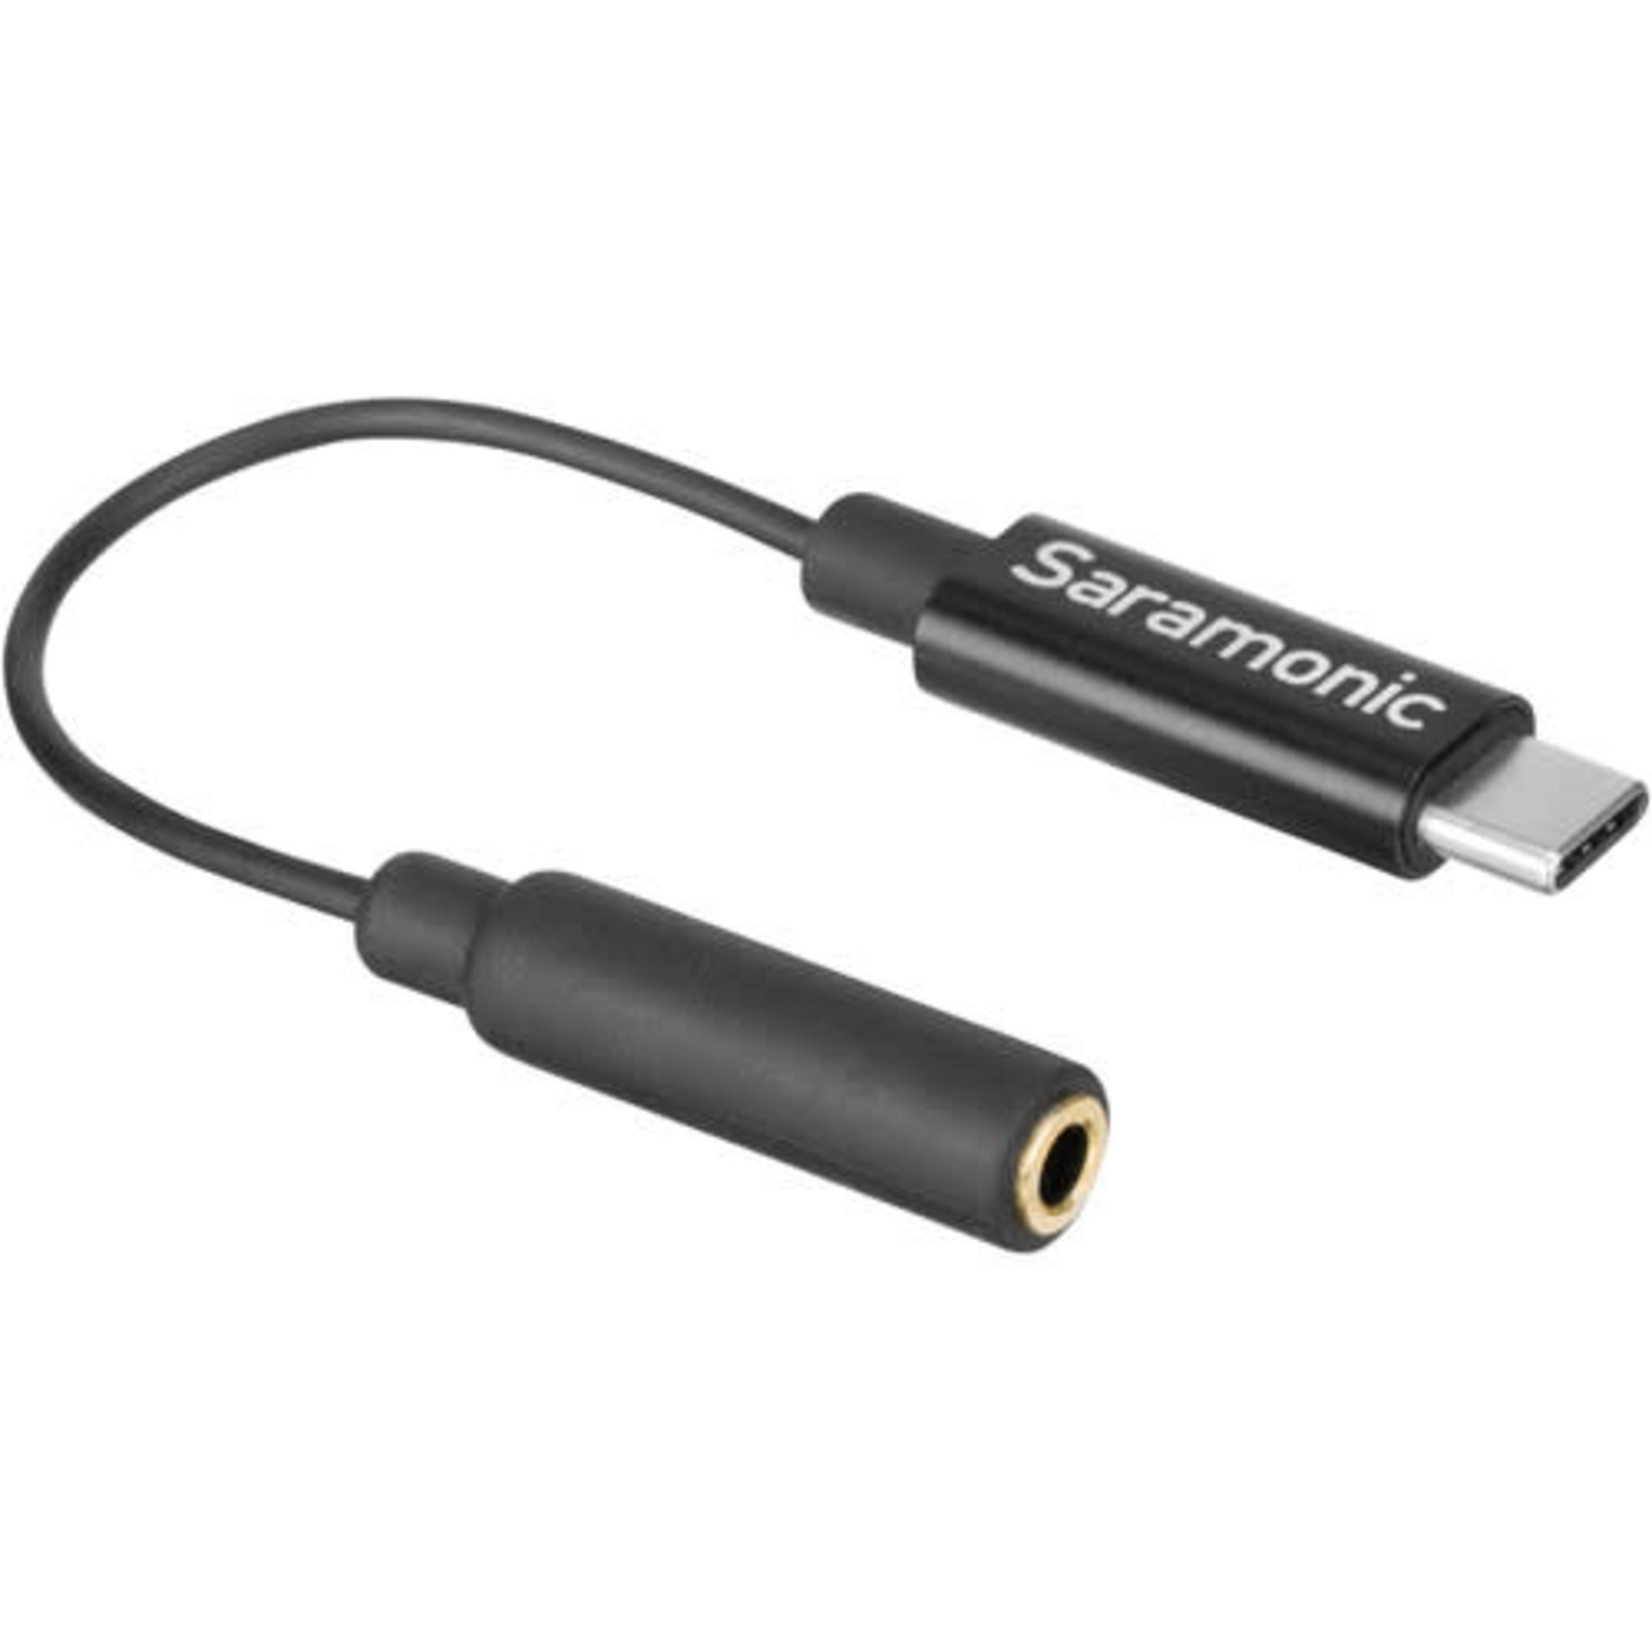 Saramonic Saramonic 3.5mm TRS Female to USB Type-C Adapter Cable for Mono/Stereo Audio to Android (3")